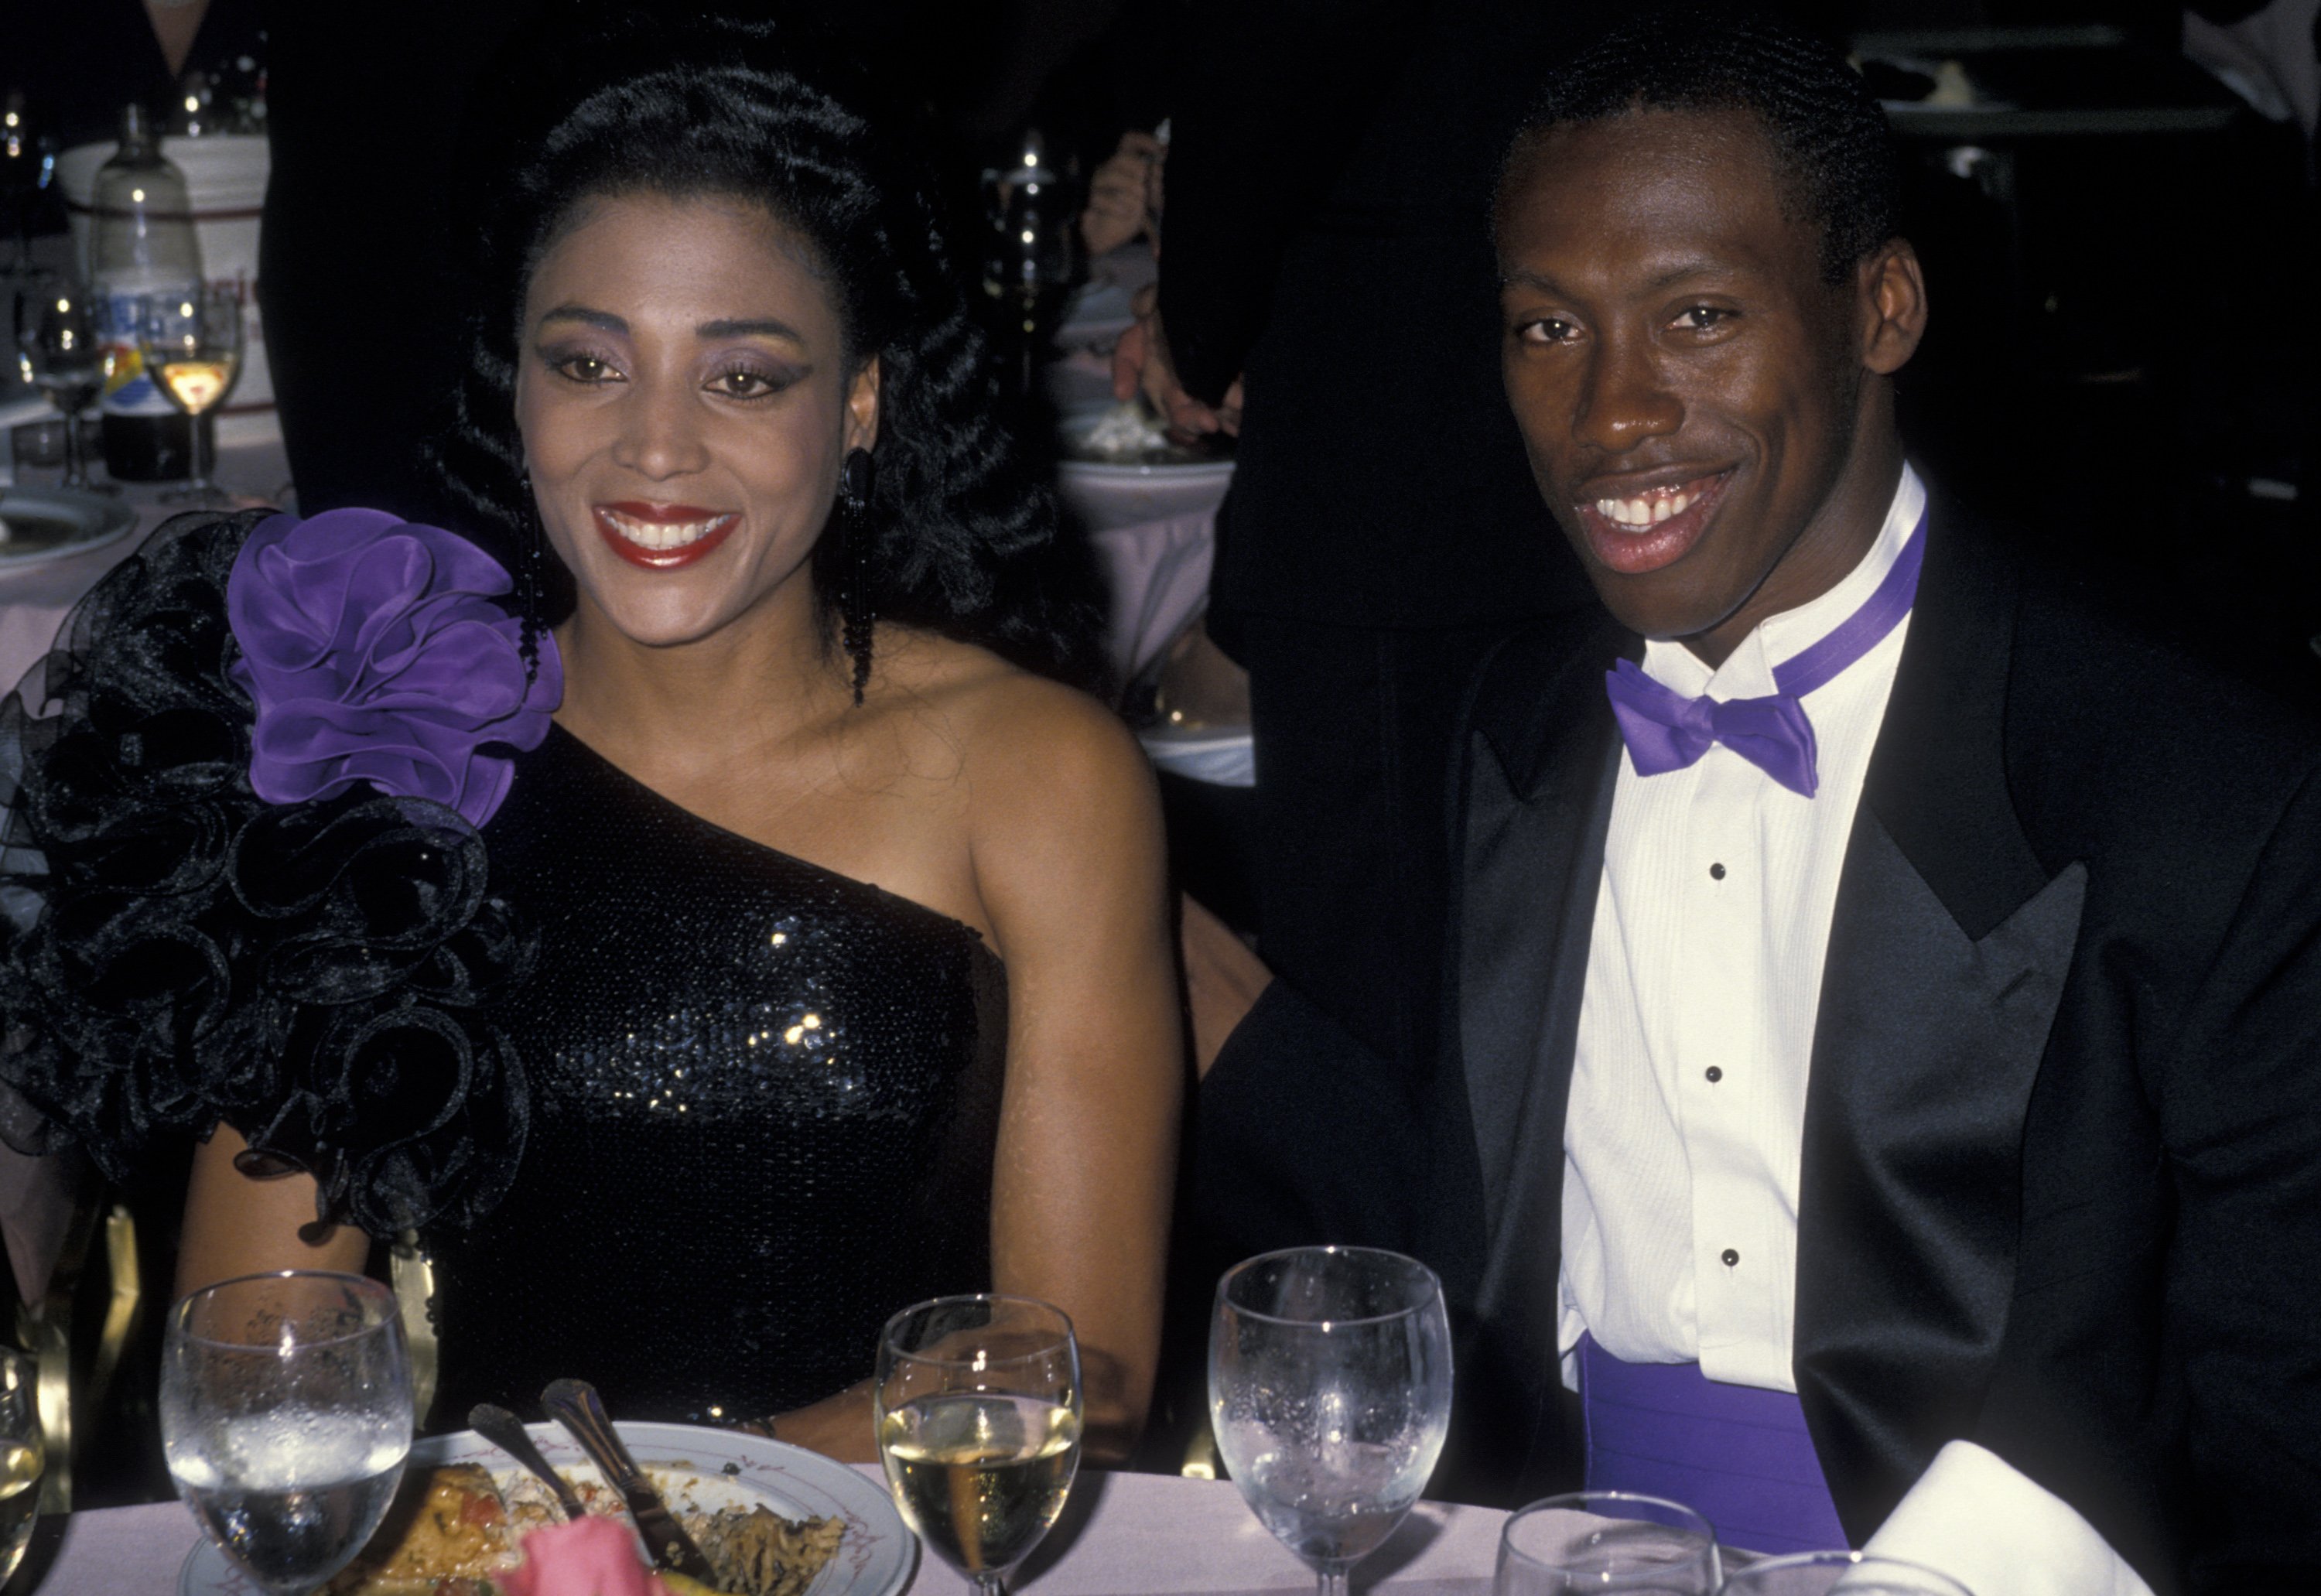 Athletes Florence Griffith-Joyner and Al Joyner at the Marriott Marquis Hotel in New York City on October 17, 1988 | Source: Getty Images 